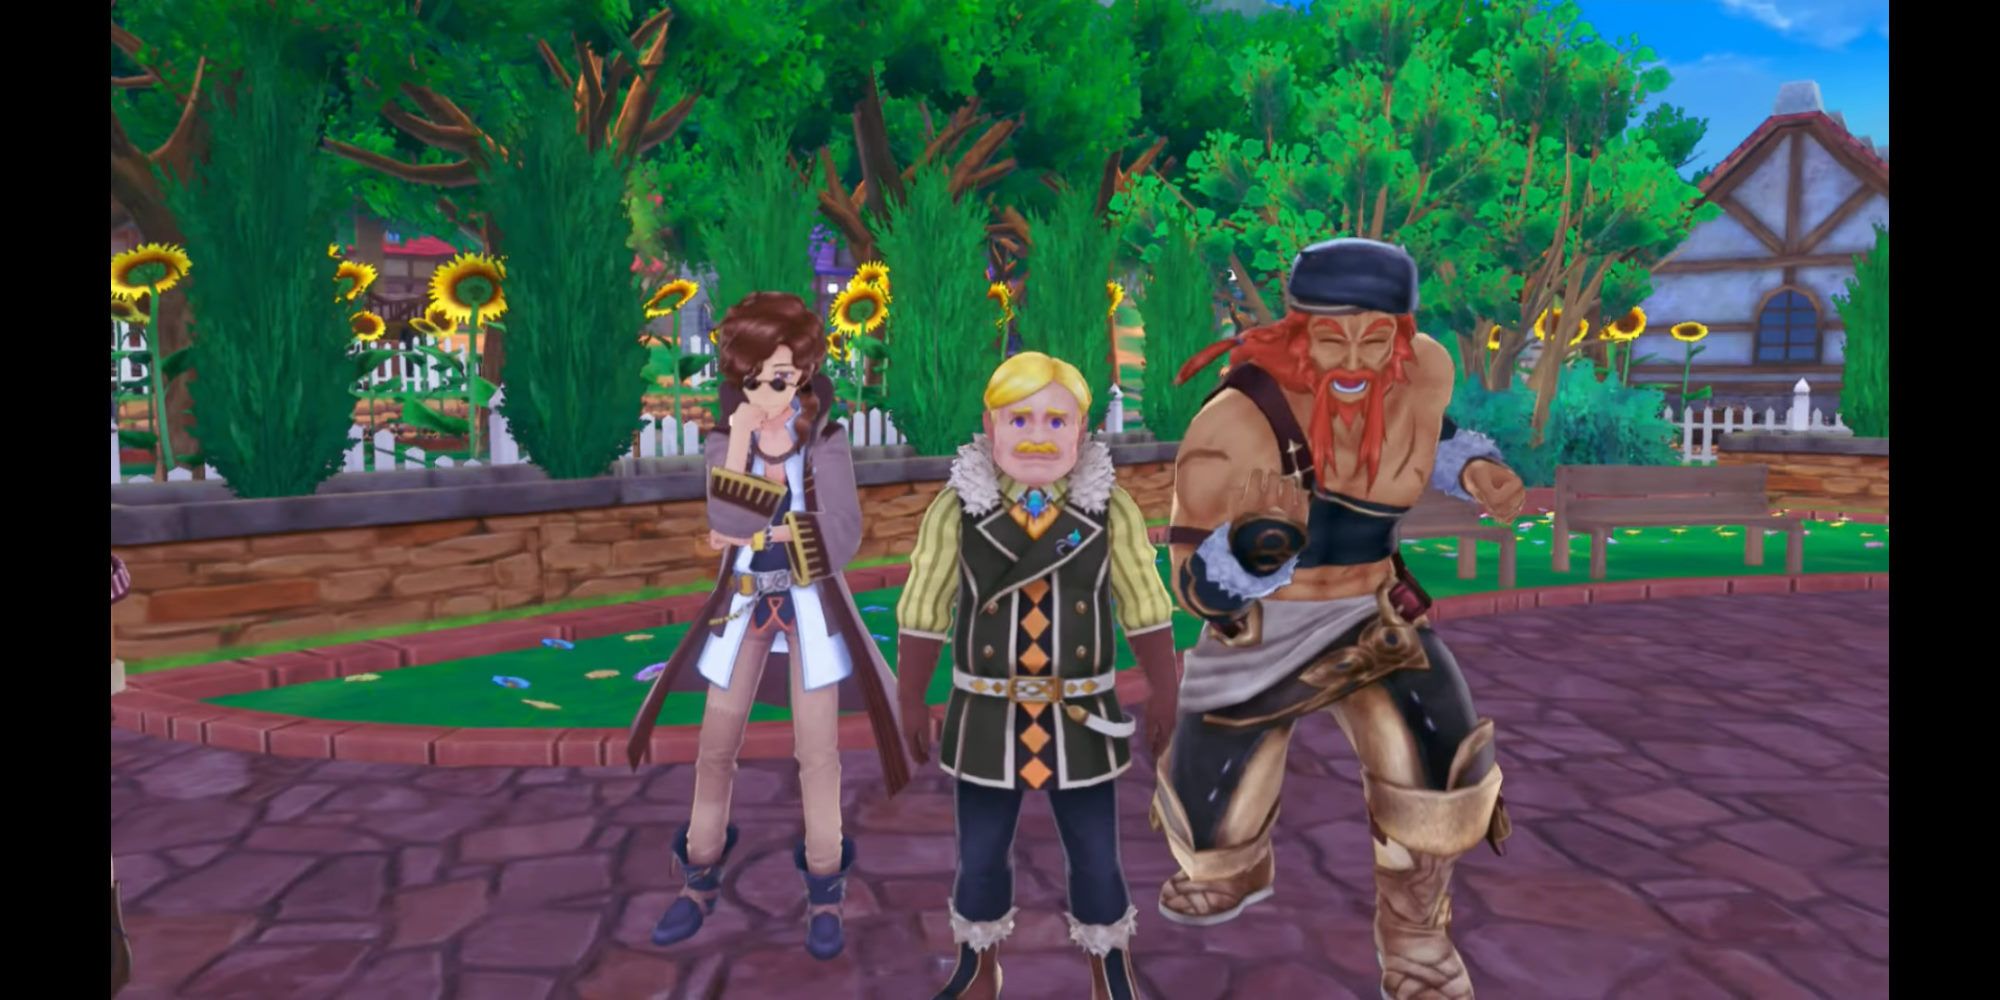 Rune Factory 5 Terry, Darroch, and Heinz looking at the viewer and posing